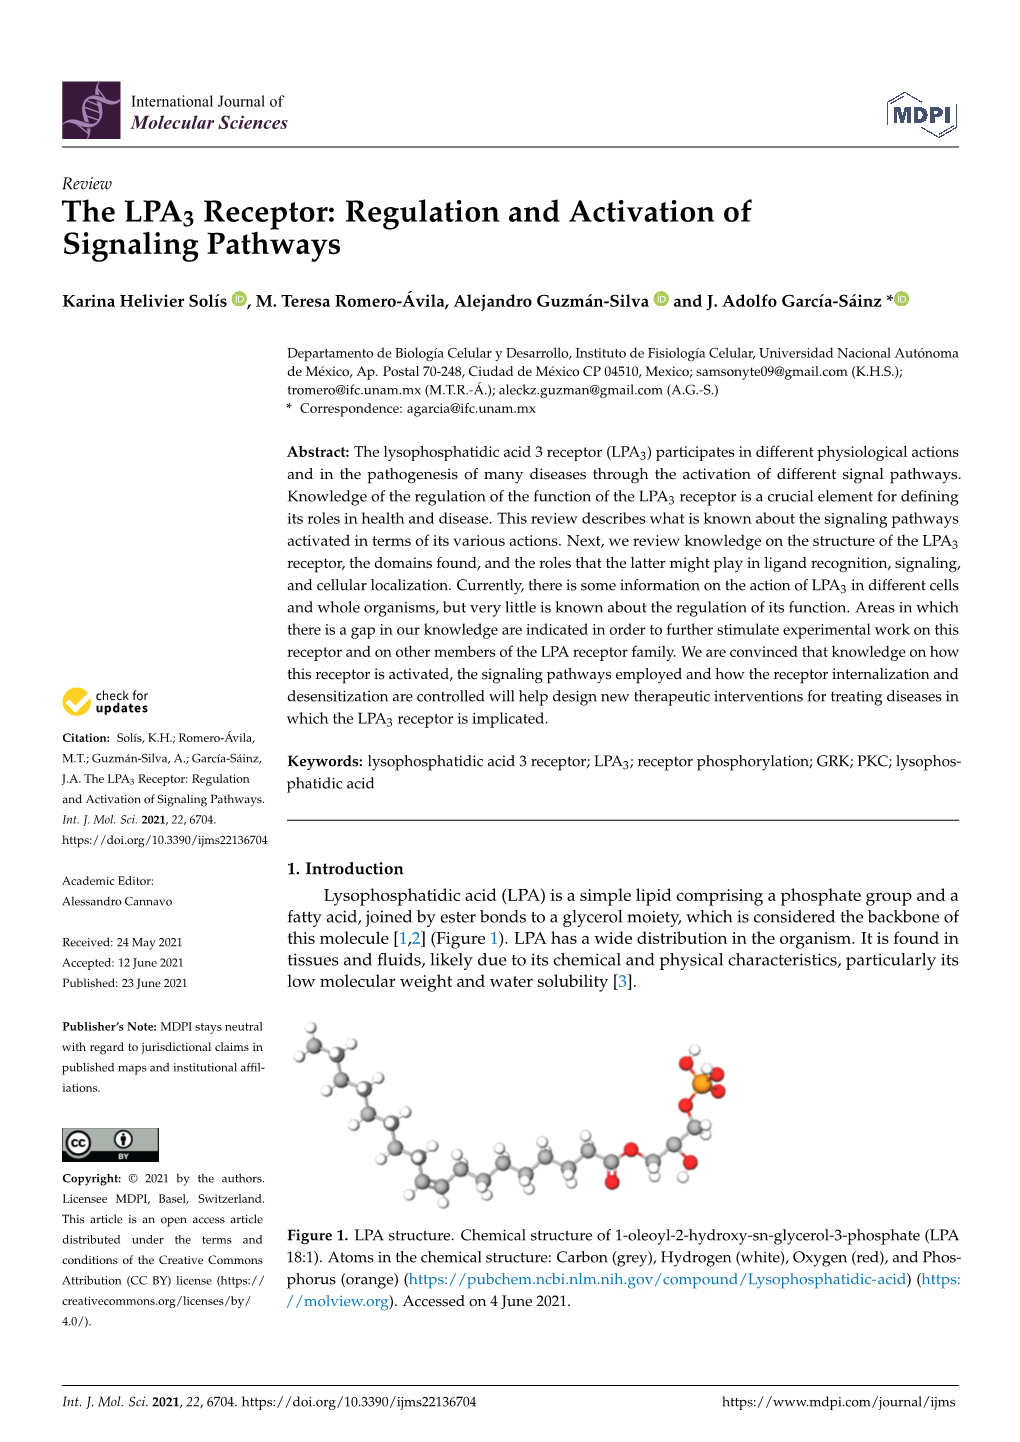 The LPA3 Receptor: Regulation and Activation of Signaling Pathways